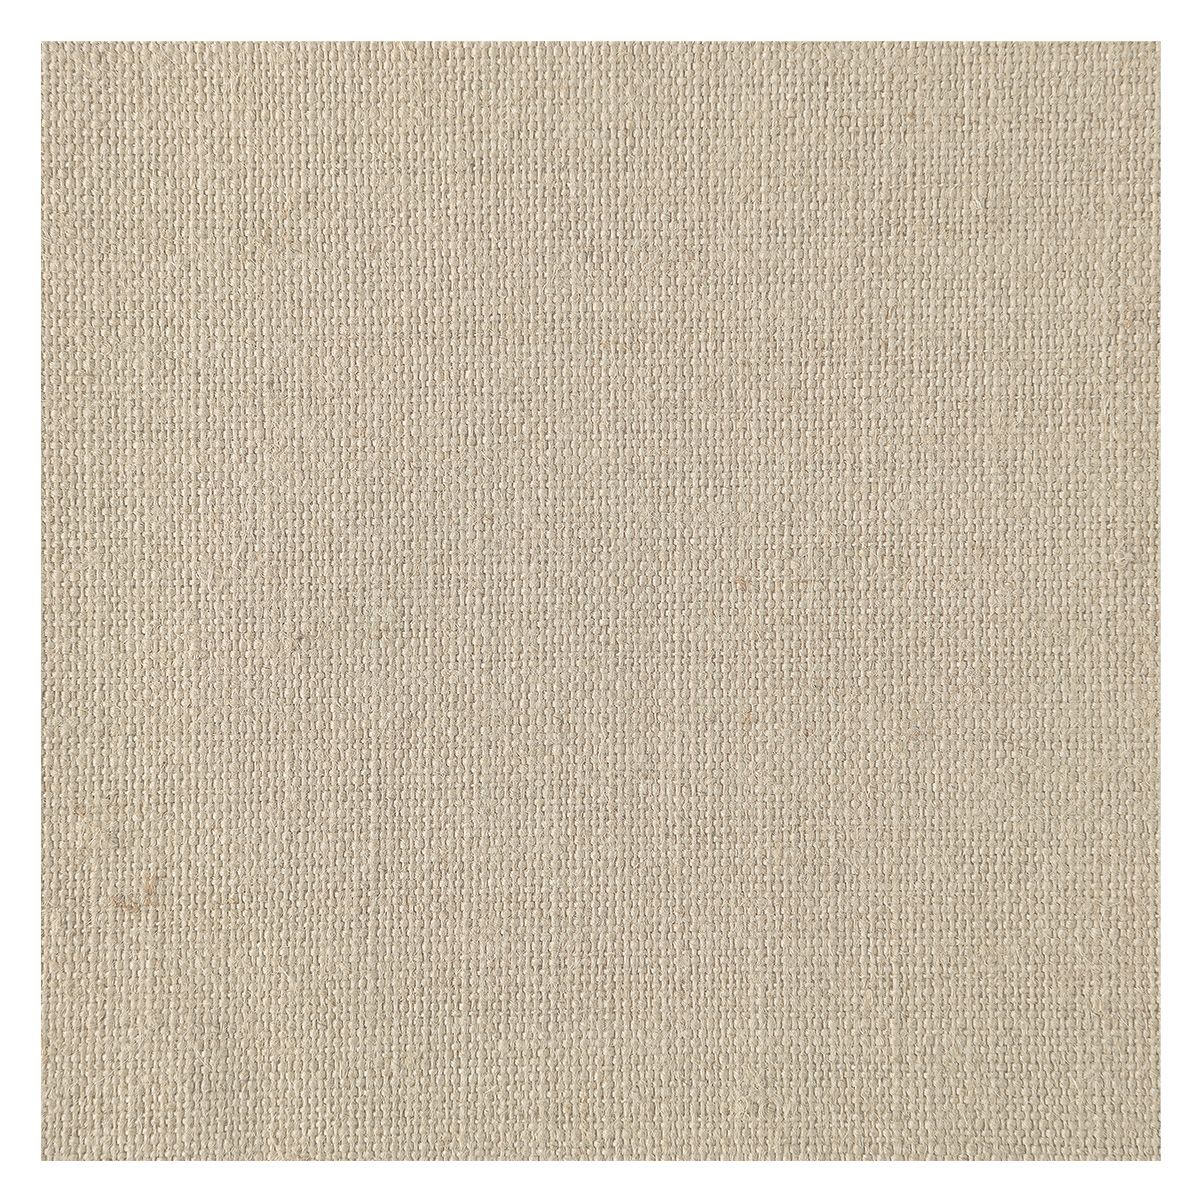 J Linen,? 9.53 oz (323 gsm), tightly woven texture ideal for most painting genres